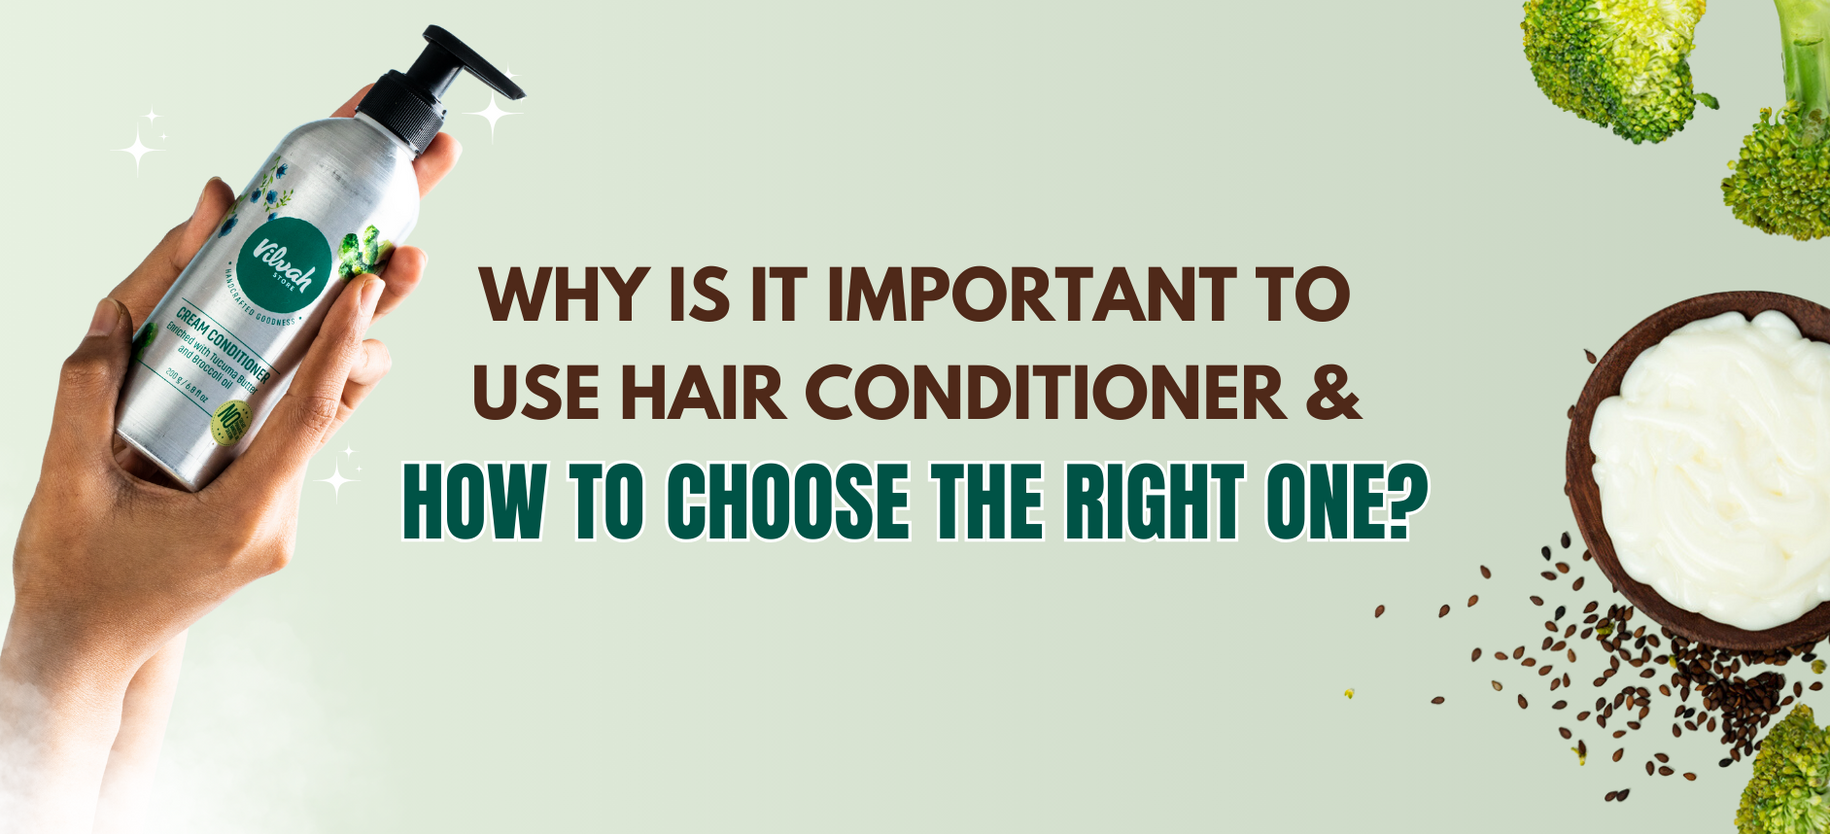 Why is it important to use Hair Conditioner and How to choose the right one?